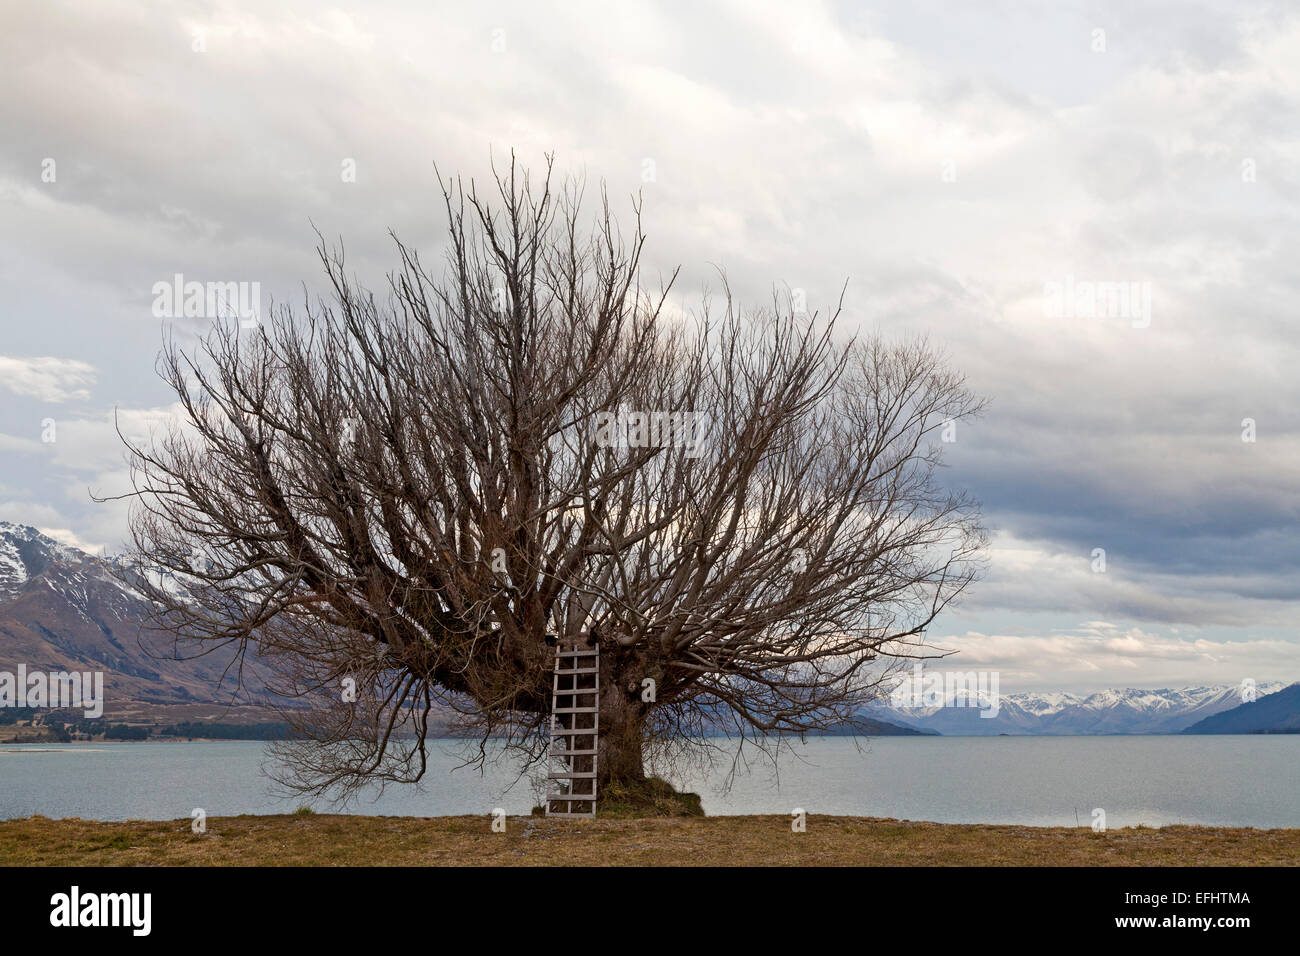 Ladder reaching into the branches of an old willow tree, Otago, Lake Wakatipu, South Island, New Zealand Stock Photo